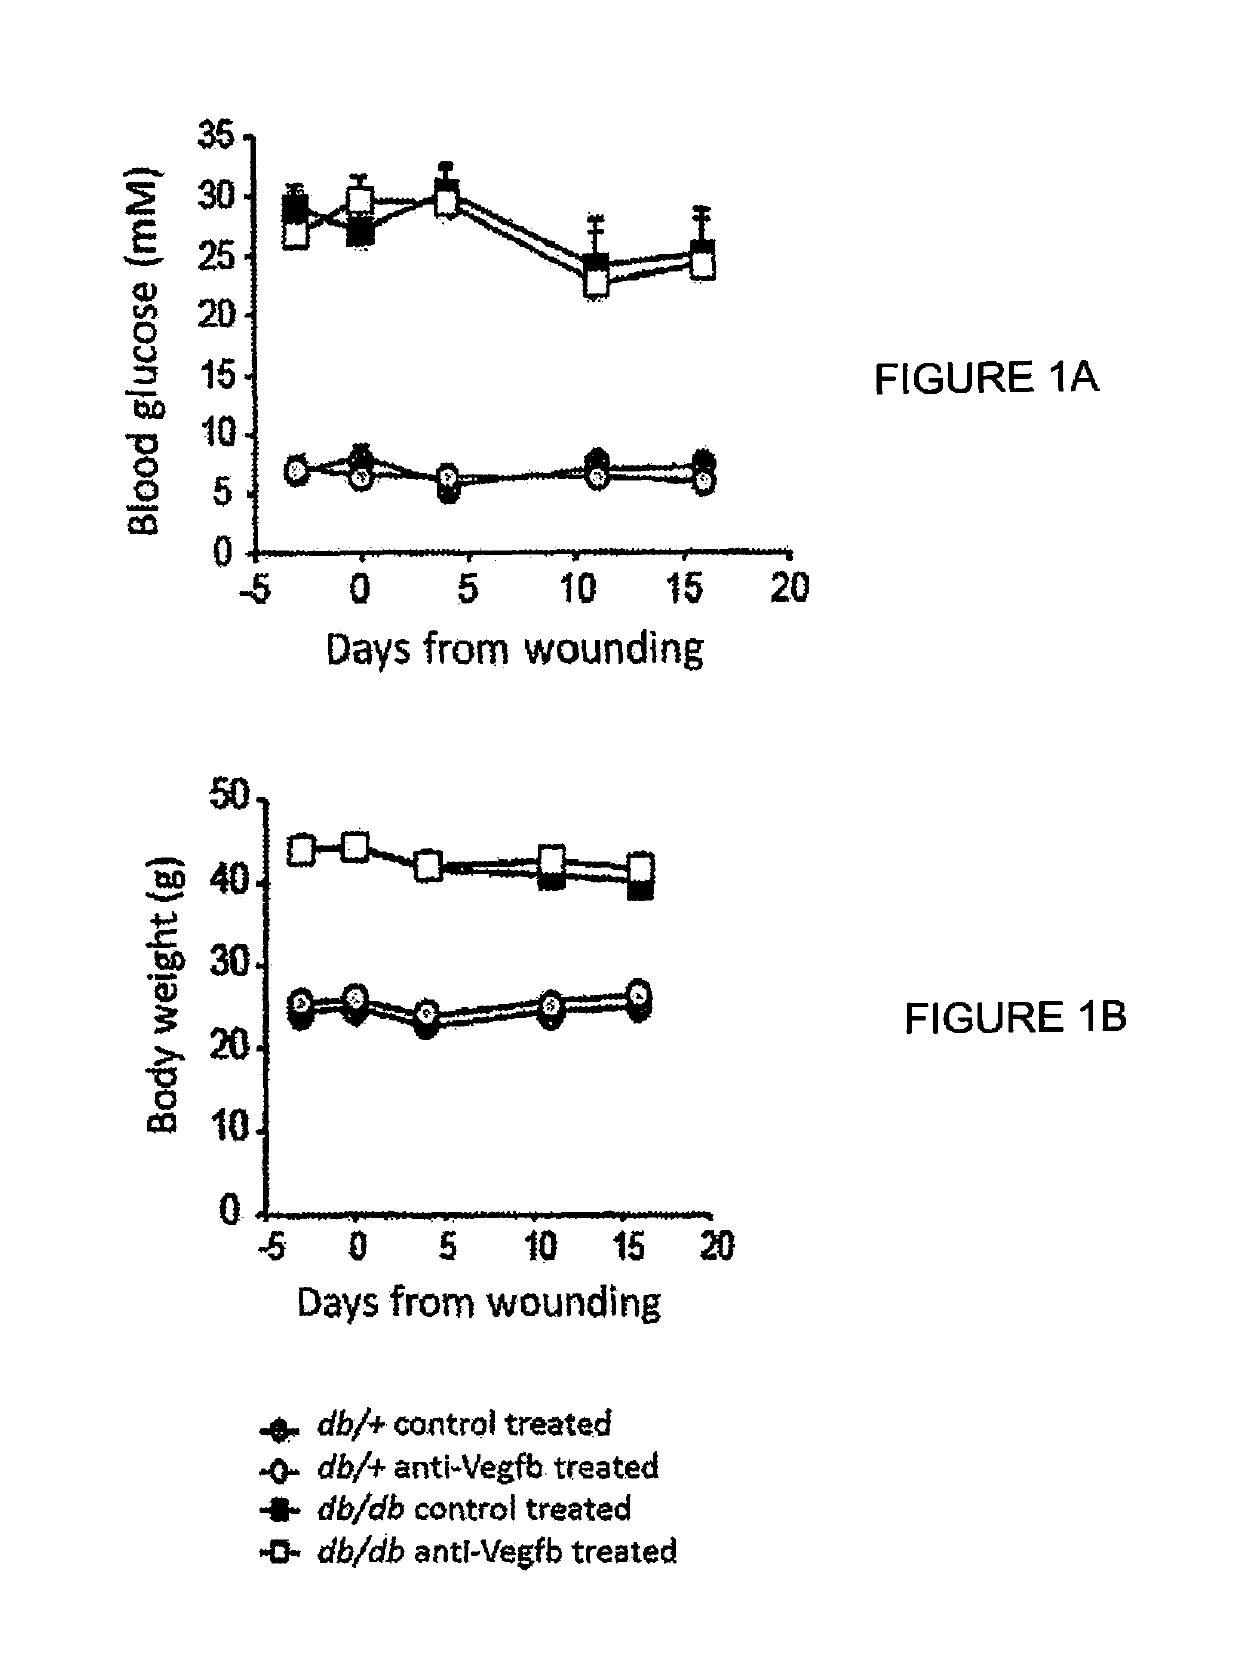 Methods of treating wounds in a diabetic subject